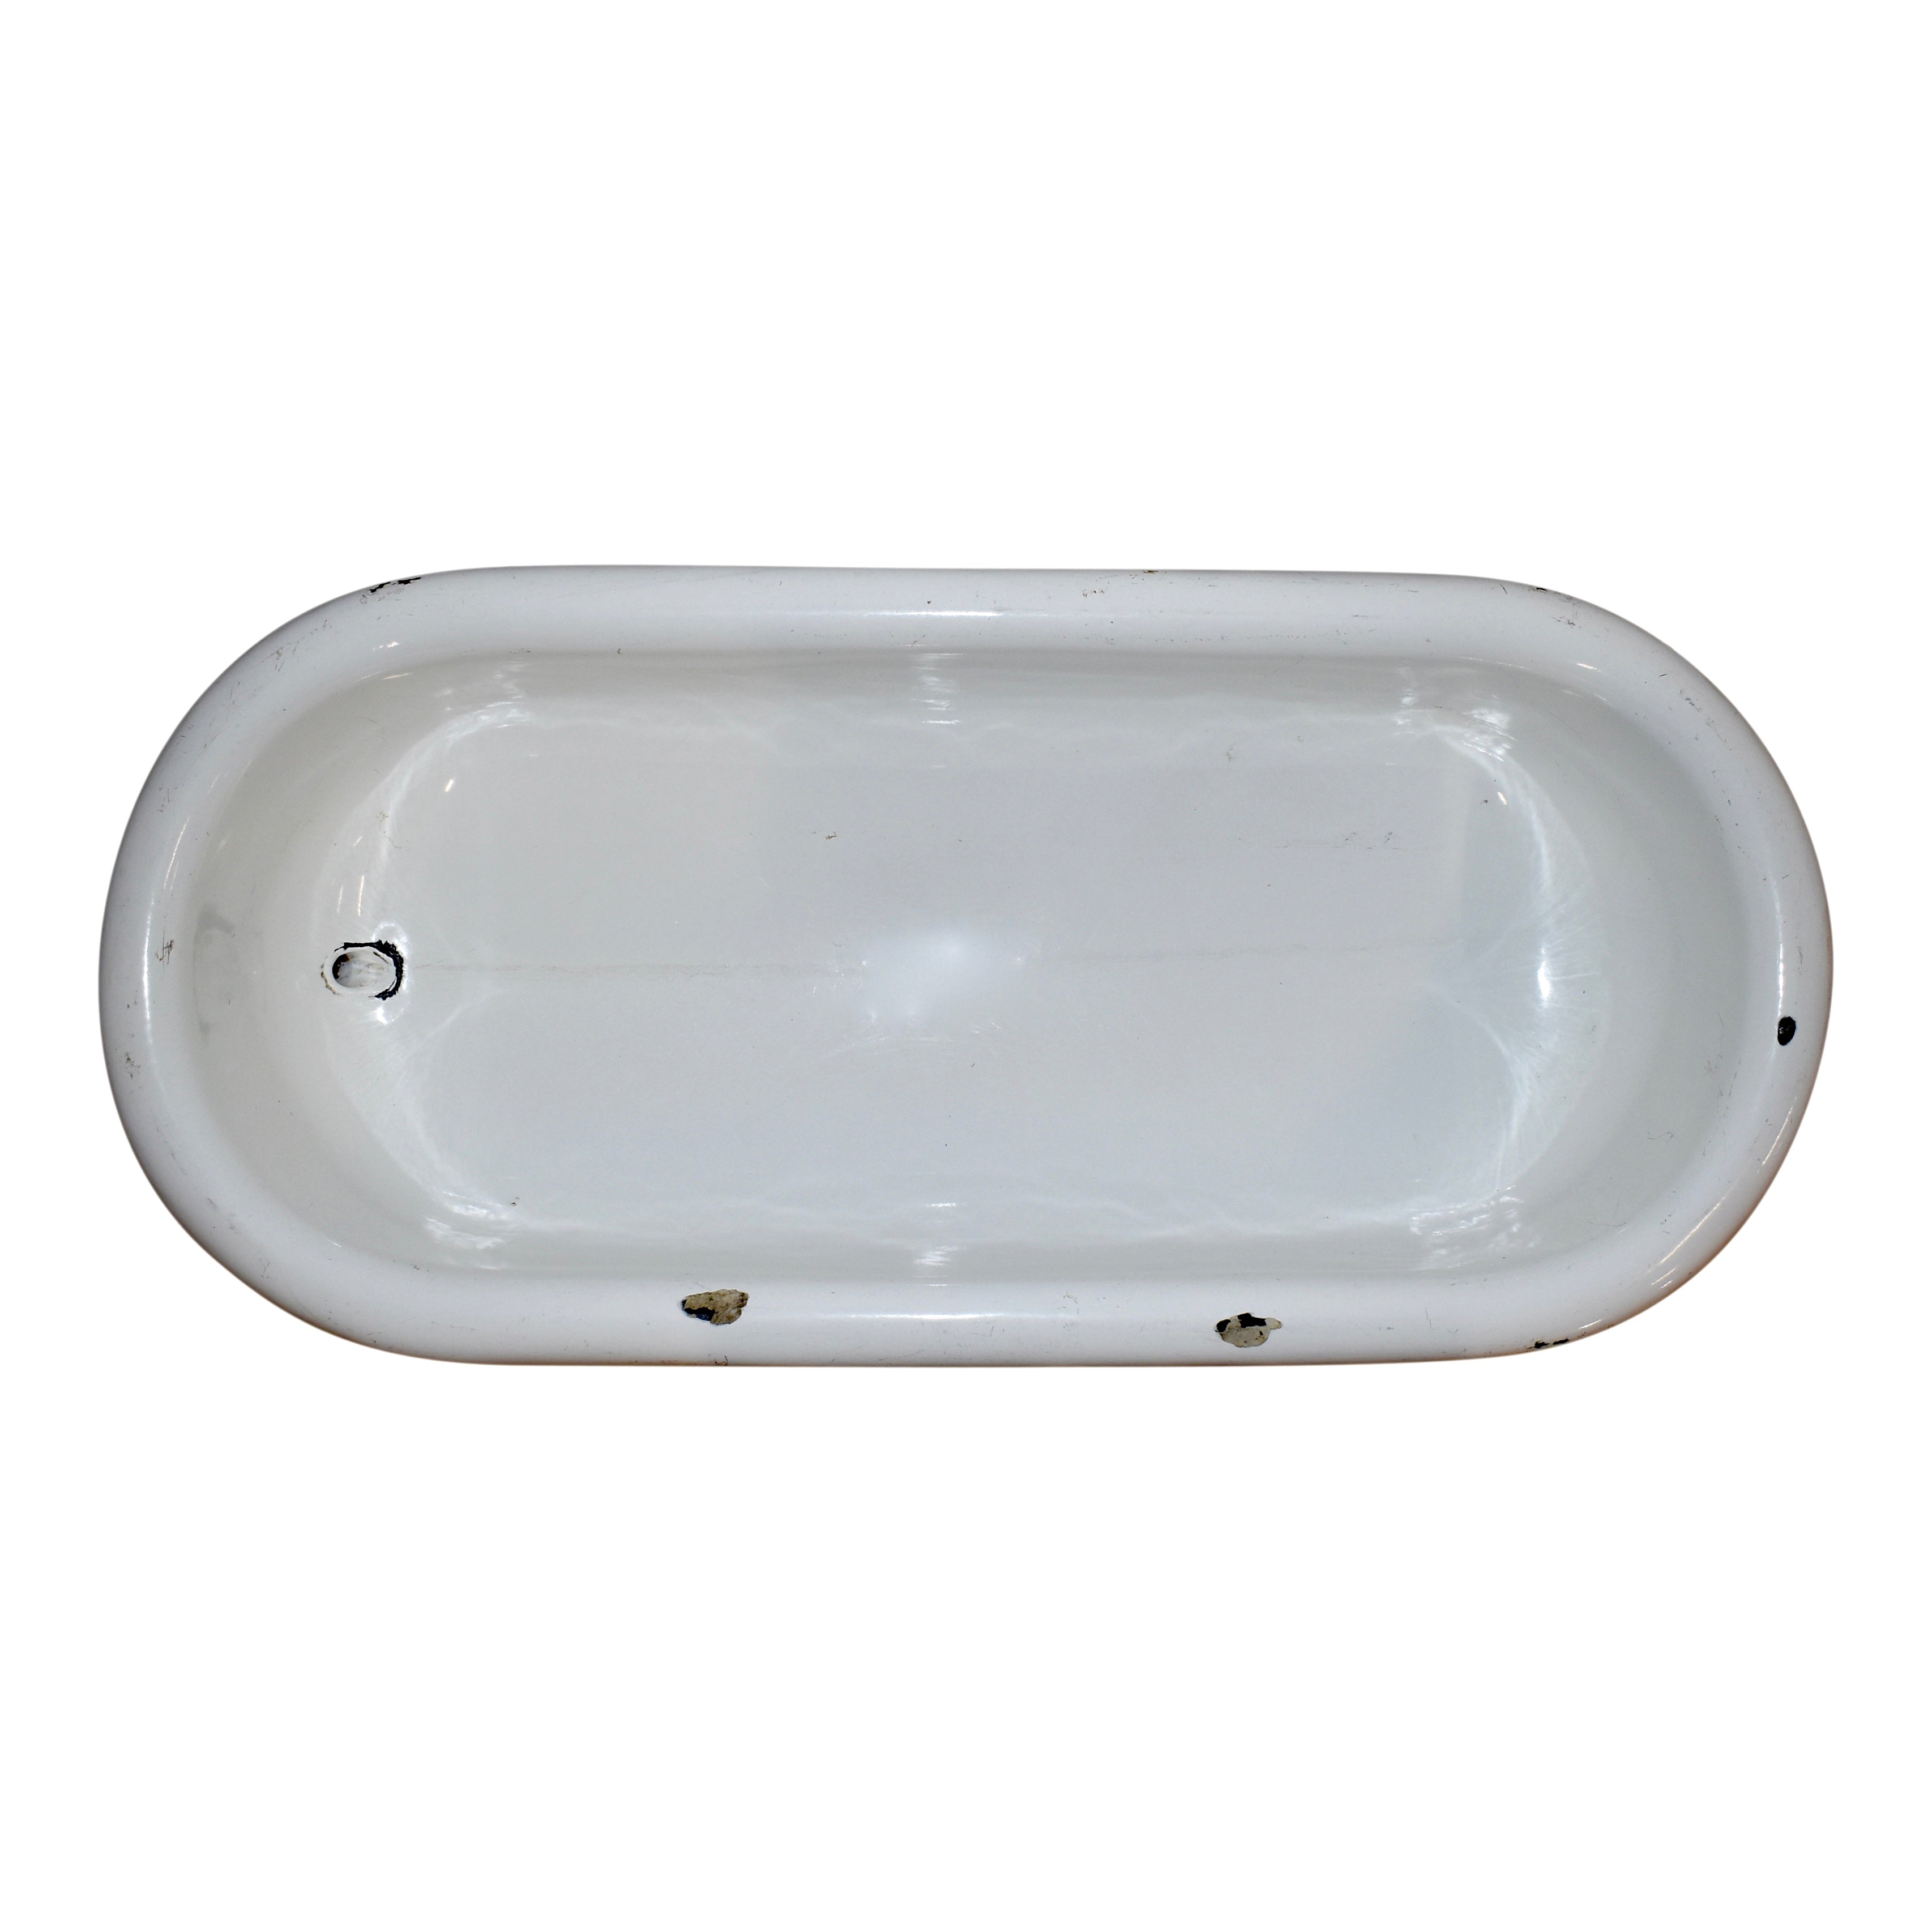 Hungarian Enamel Bathtub with Stand